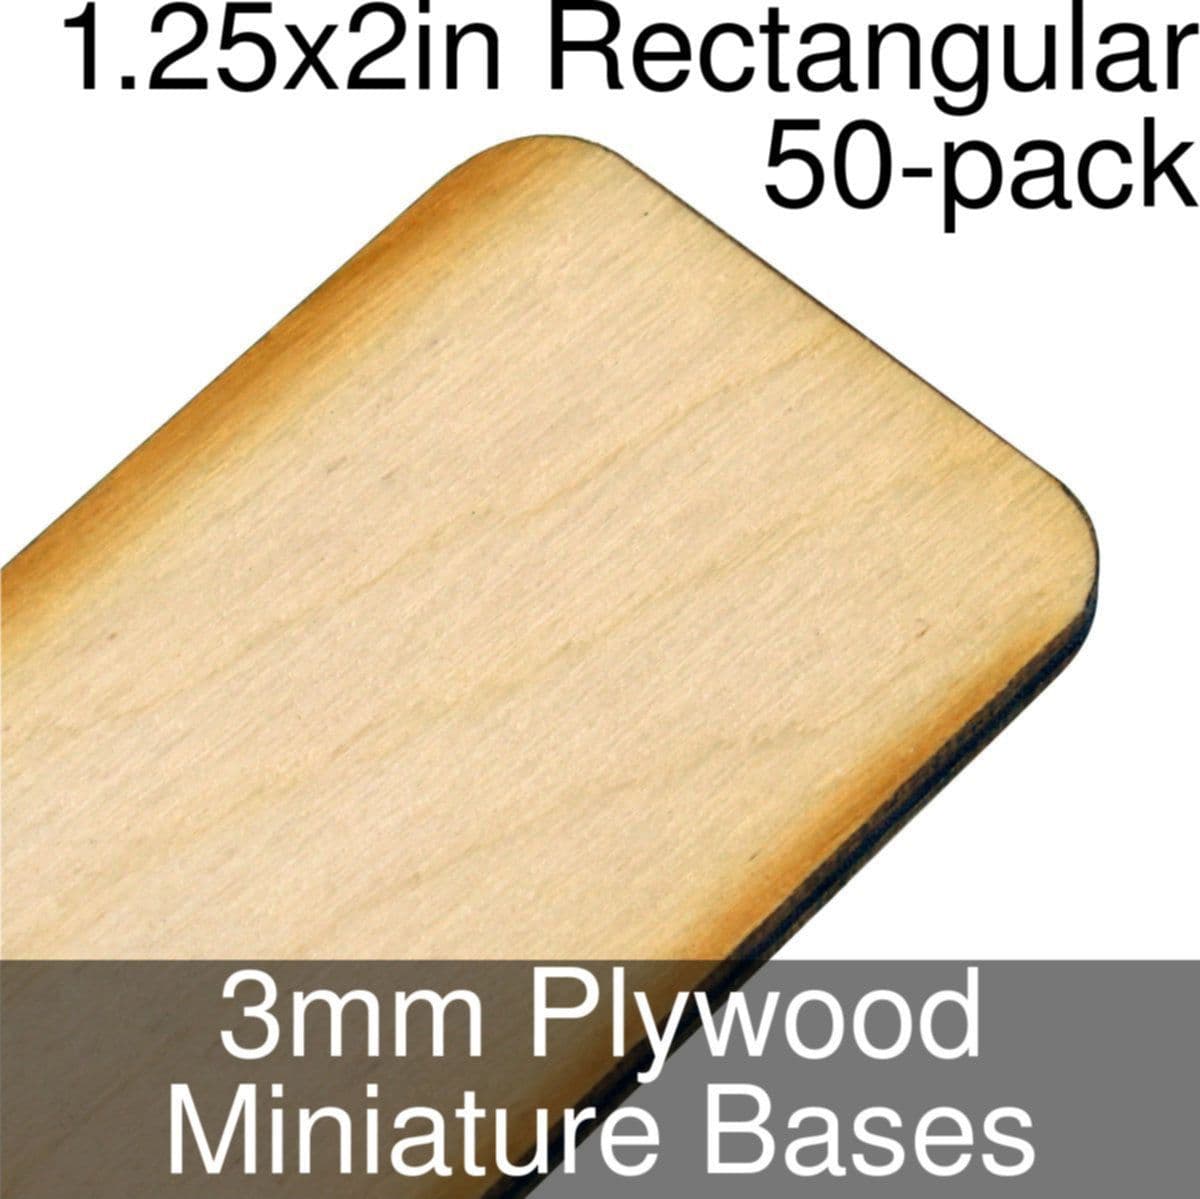 Miniature Bases, Rectangular, 1.25x2in (Rounded Corners), 3mm Plywood (50)